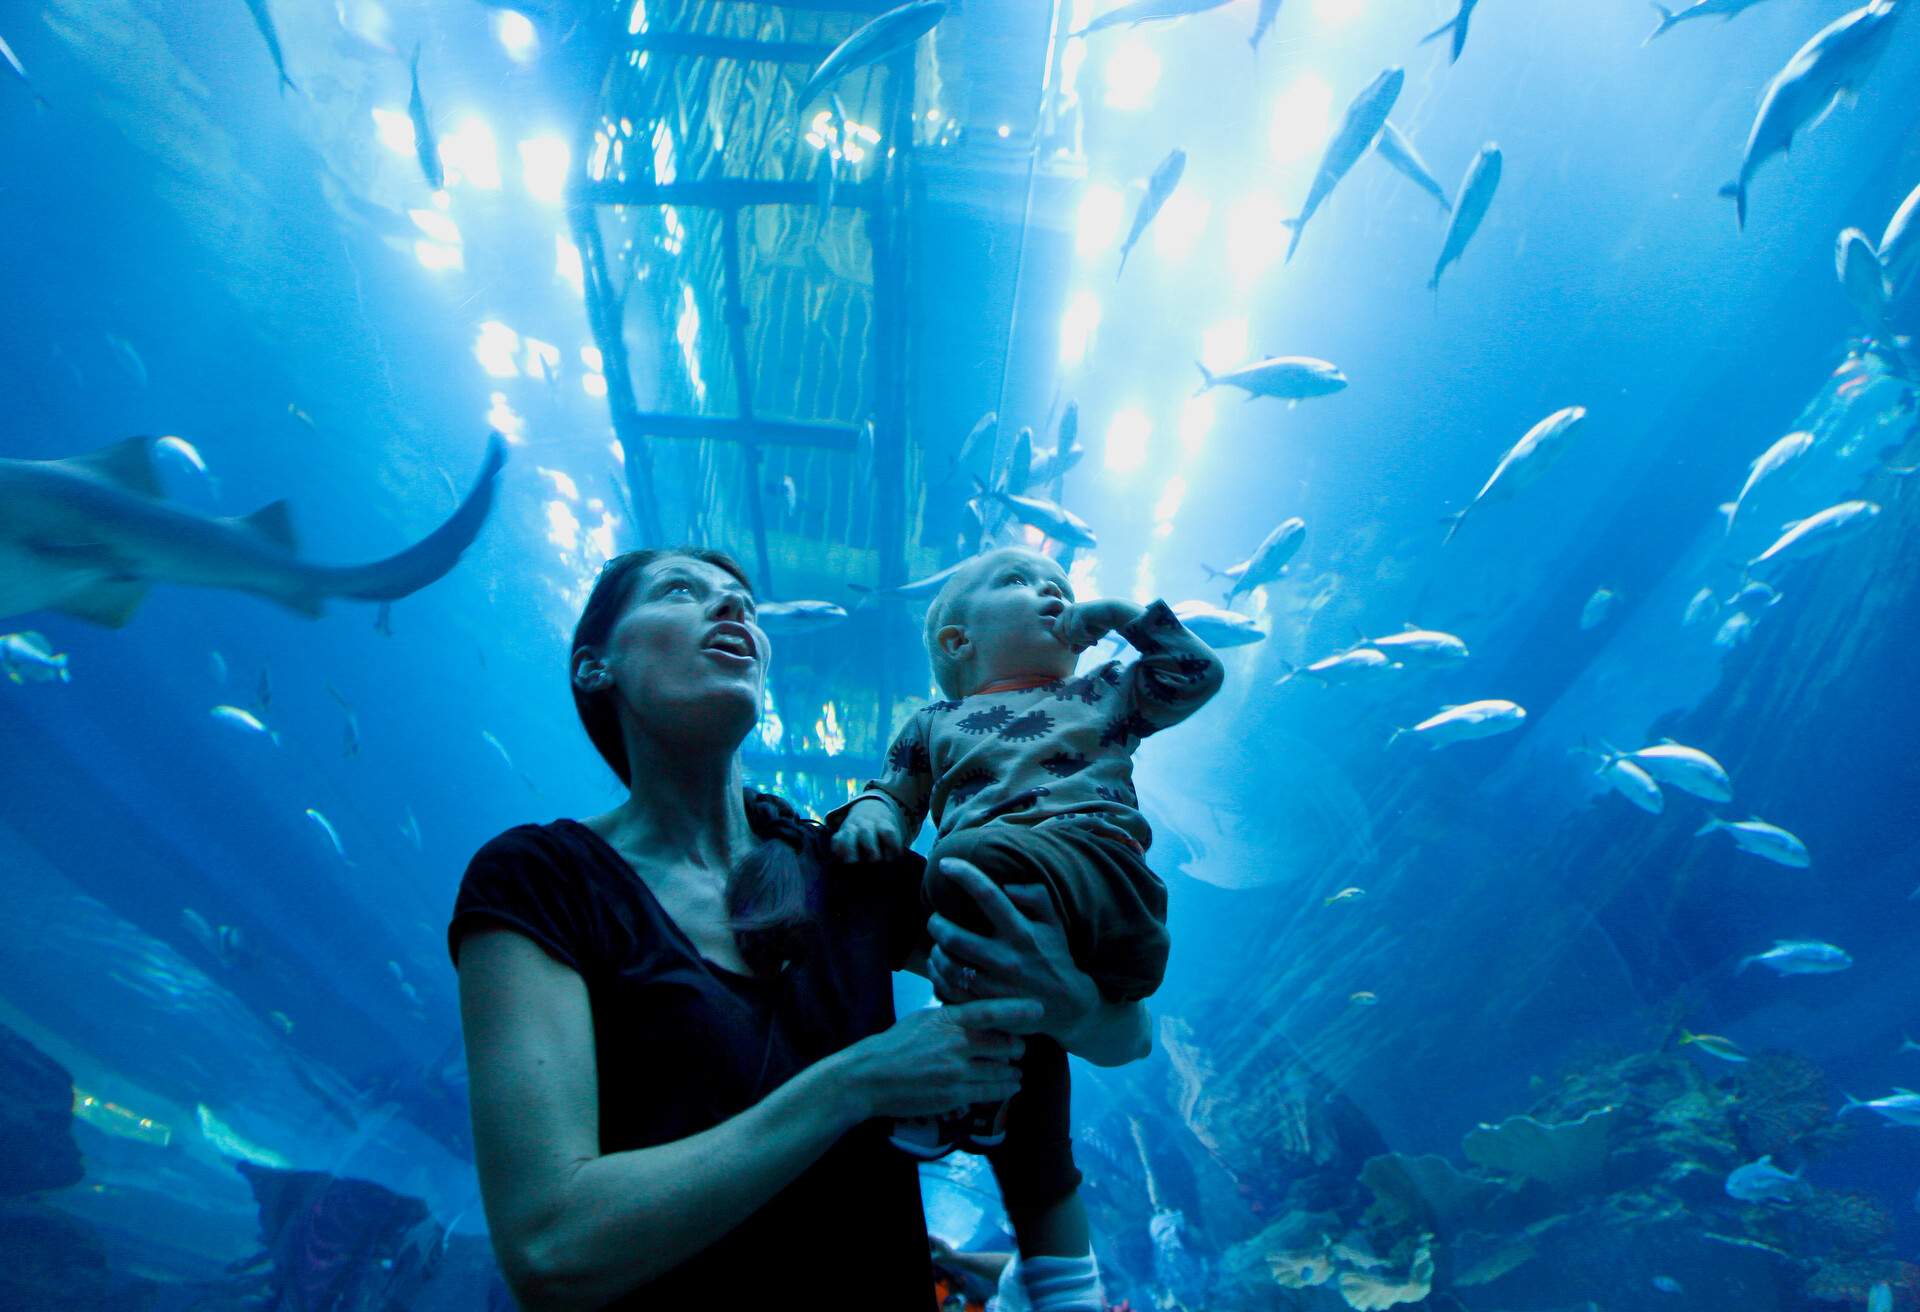 THEME_PEOPLE_MOTHER_TODDLER_KID_AQUARIUM_GettyImages-763168369